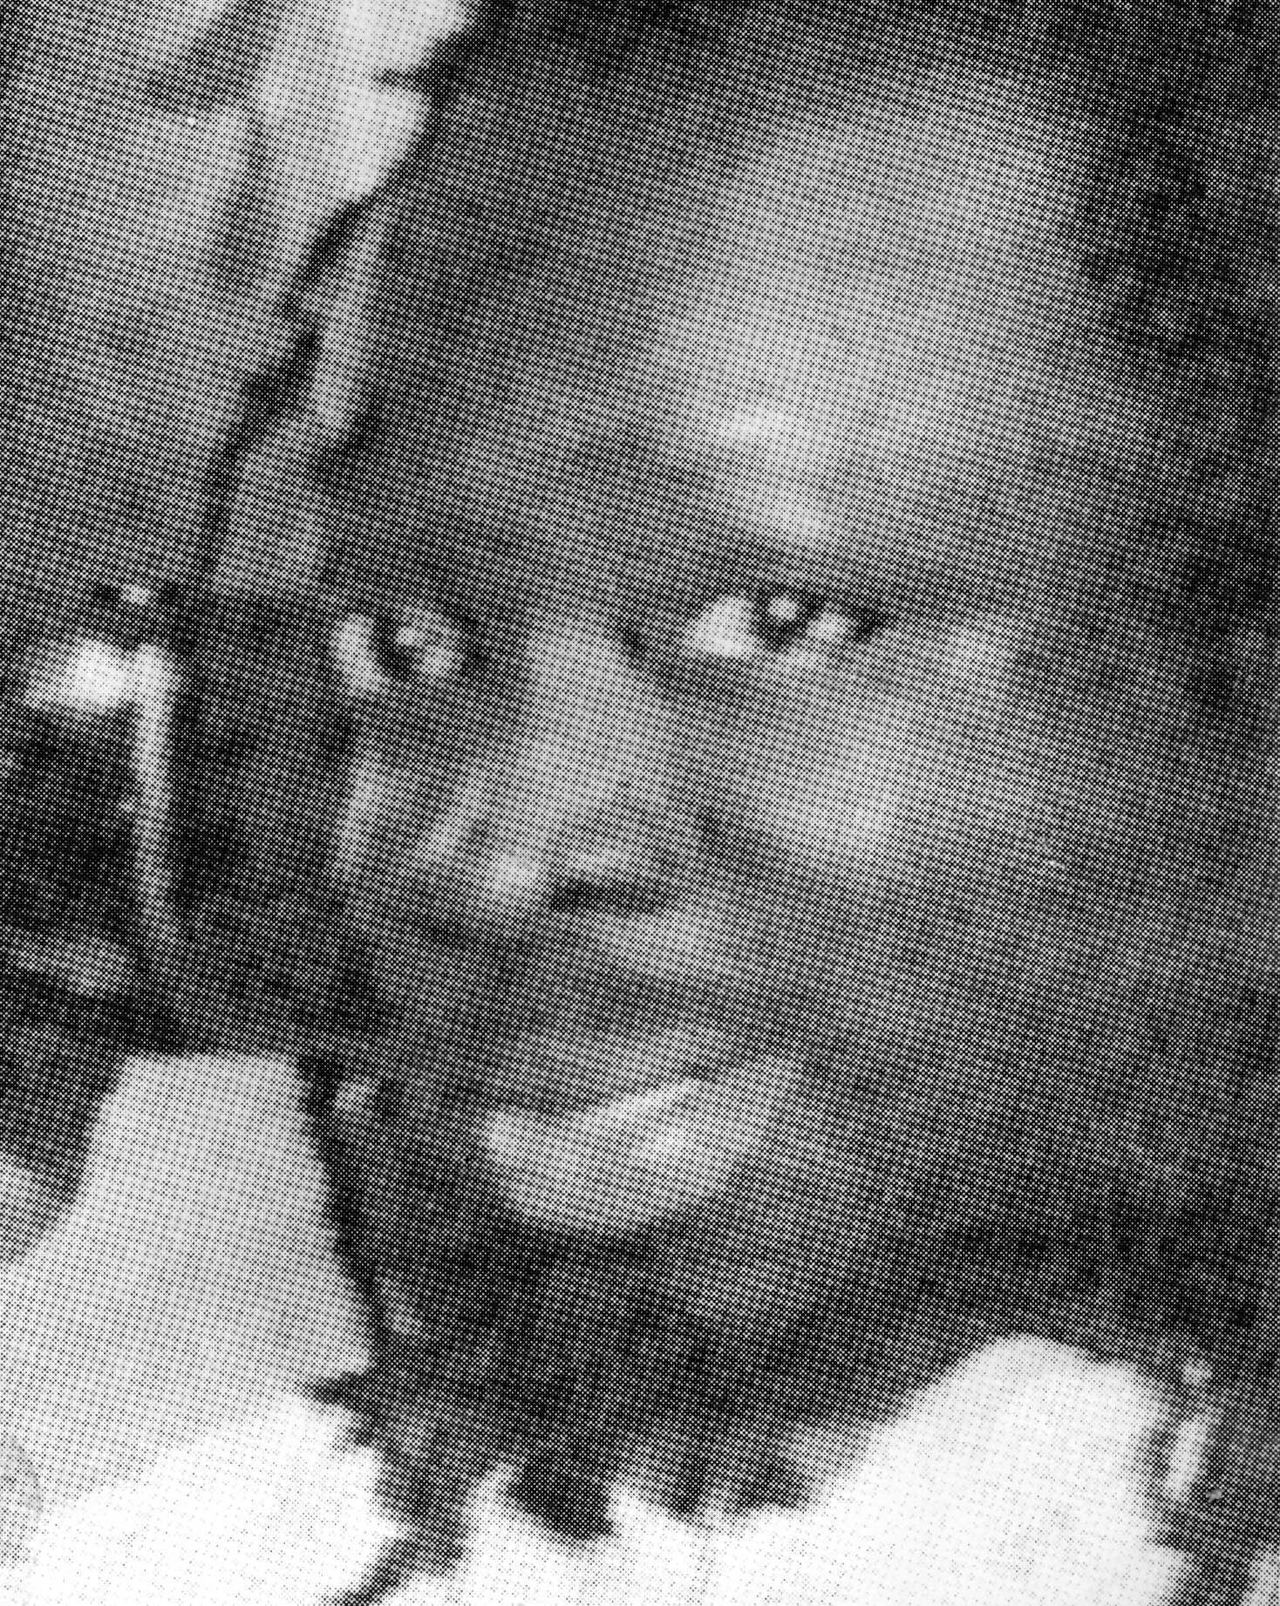 Ibrahima Sey died at Ilford police station after being sprayed with CS gas following his arrest 